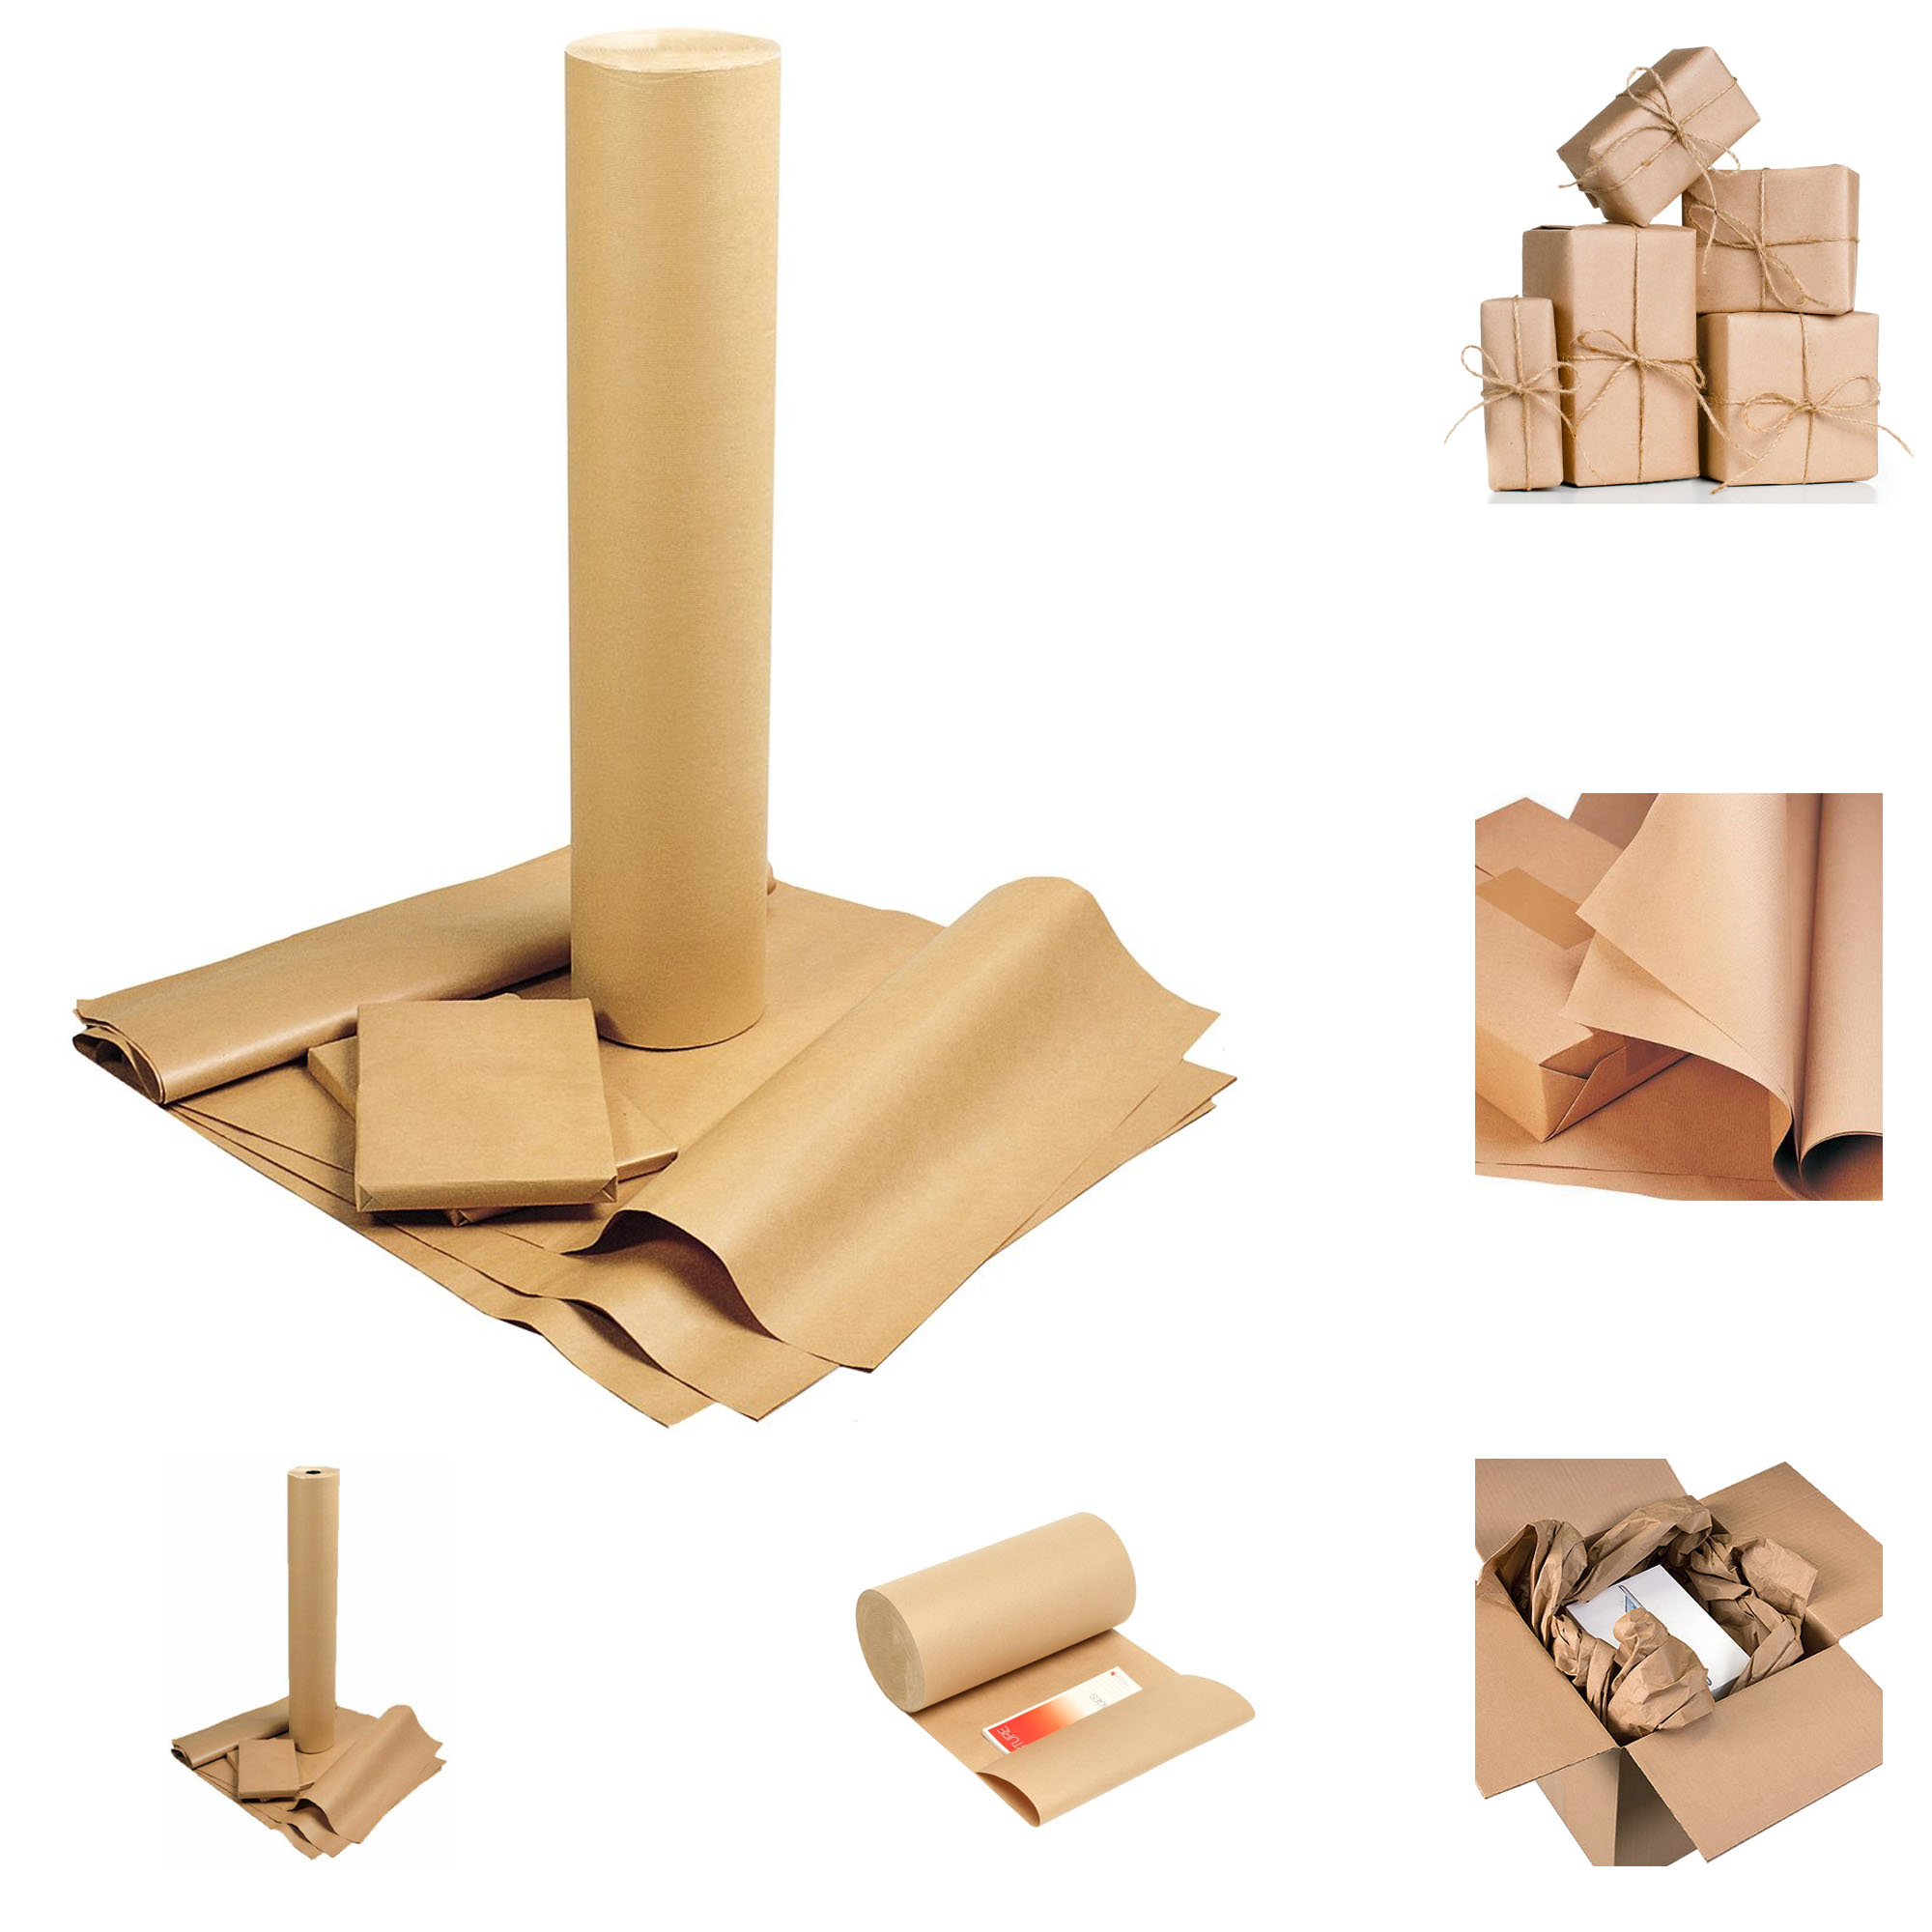 Dunnage & Parcel. 2 Gift Wrapping Postal Packing 100% Recycled Material Shipping Art Proudly Made in USA Brown Kraft Paper Roll 36” x 200 ft Roll Multi-Use for Crafts 